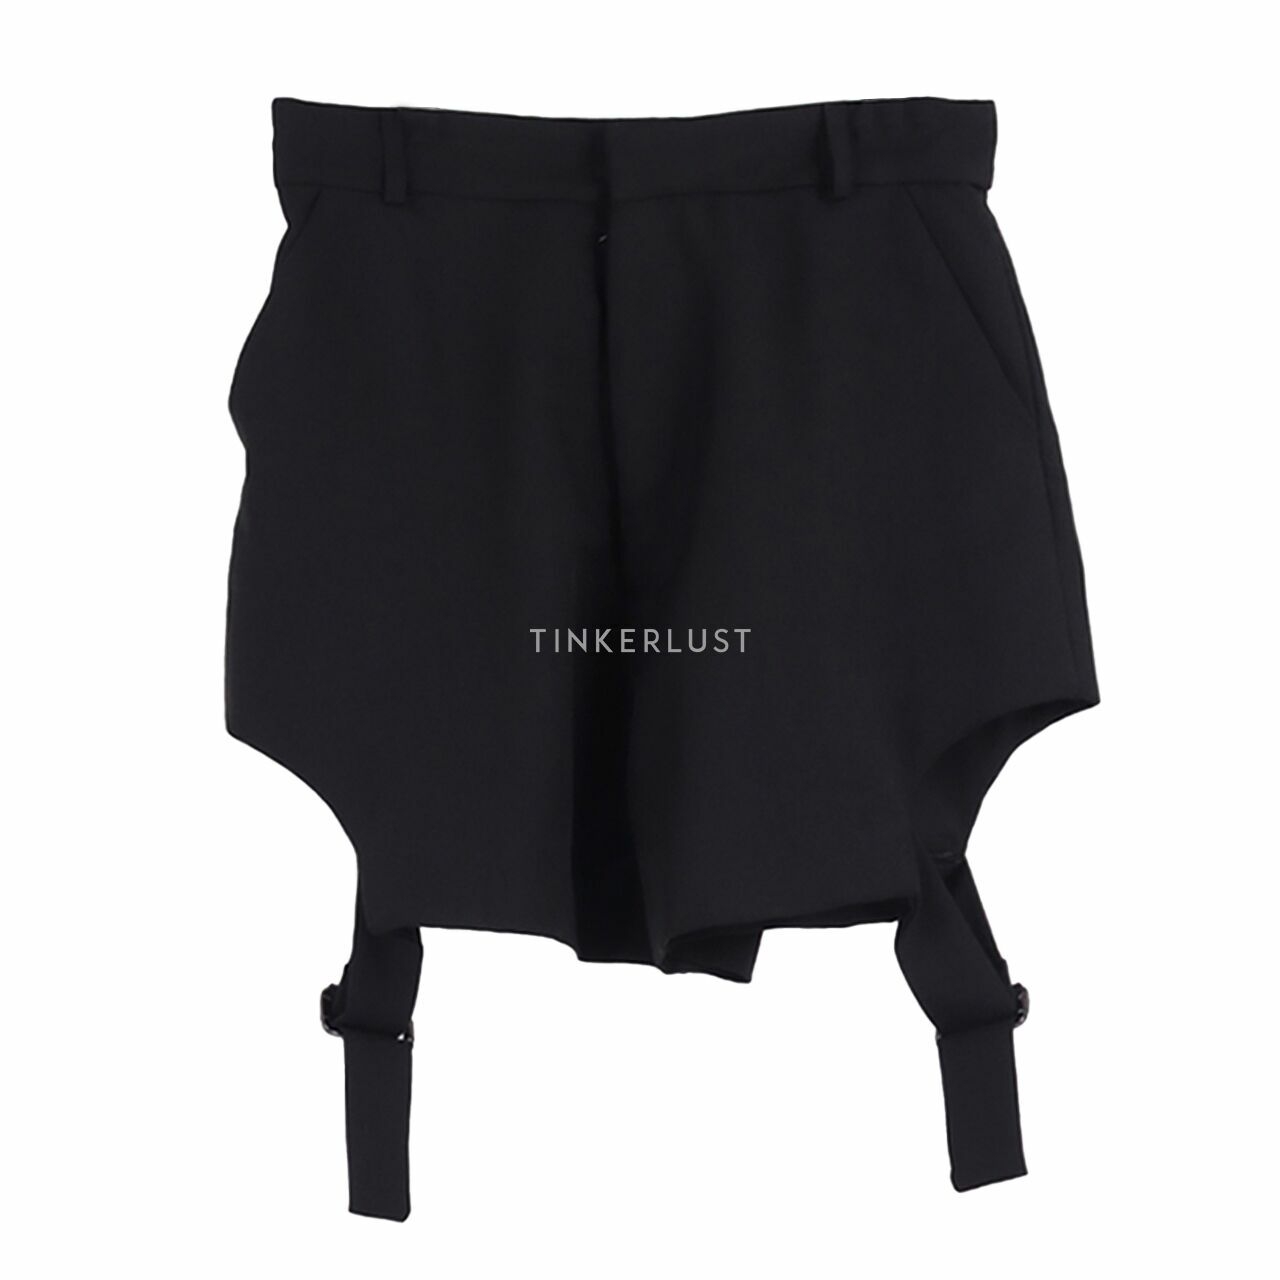 claude by Everyday Black Short Pants